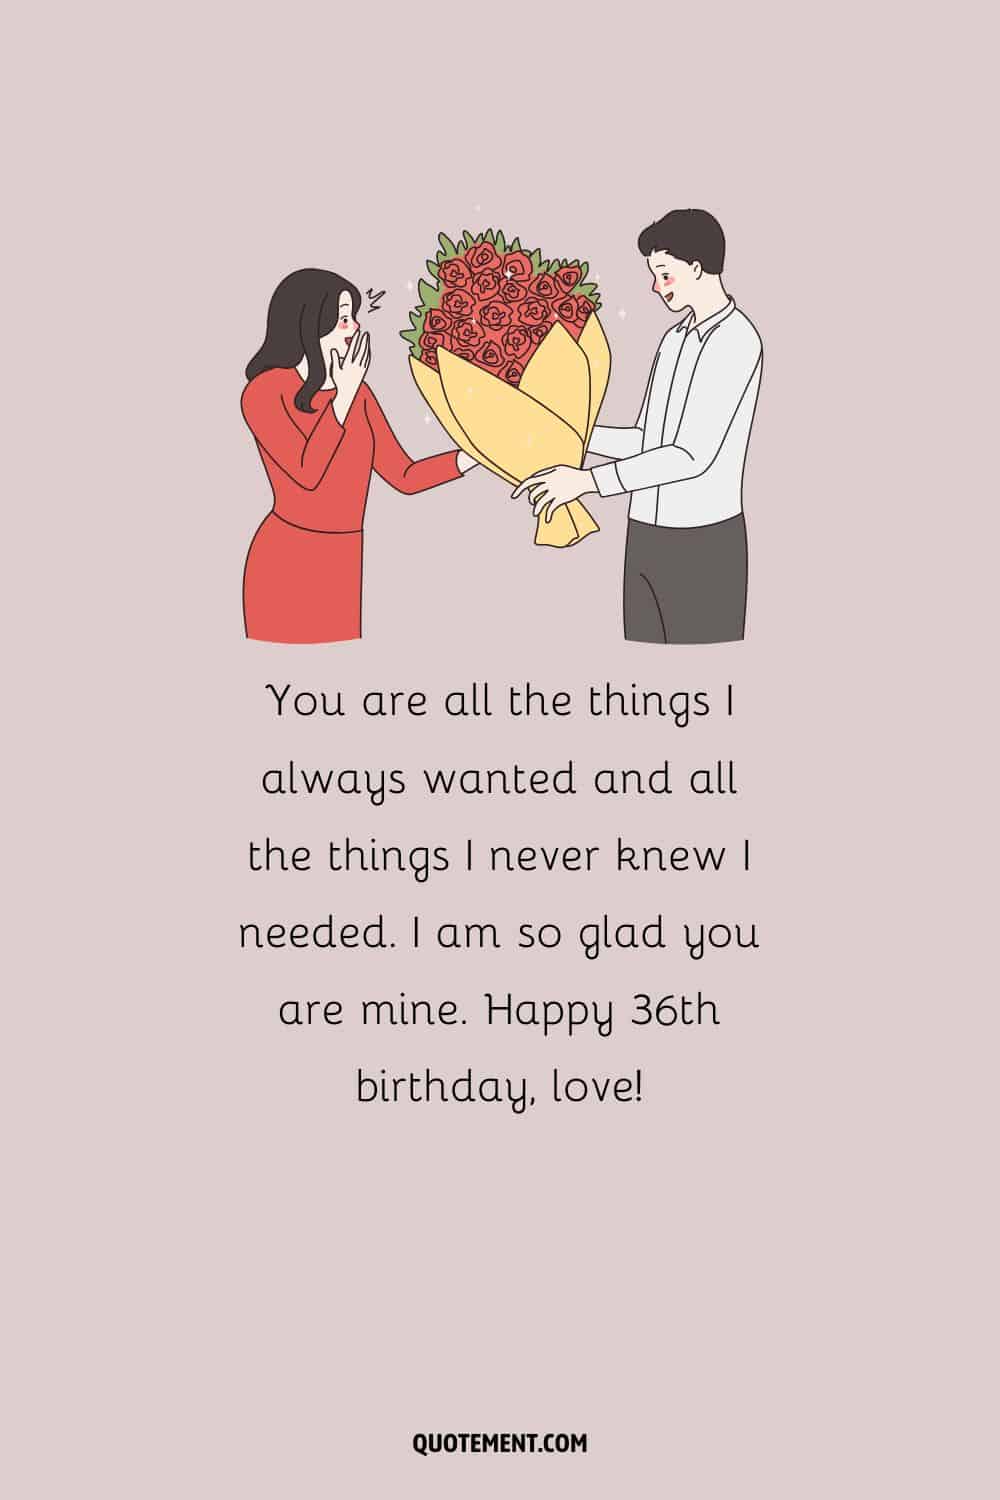 You are all the things I always wanted and all the things I never knew I needed. I am so glad you are mine. Happy 36th birthday, love!